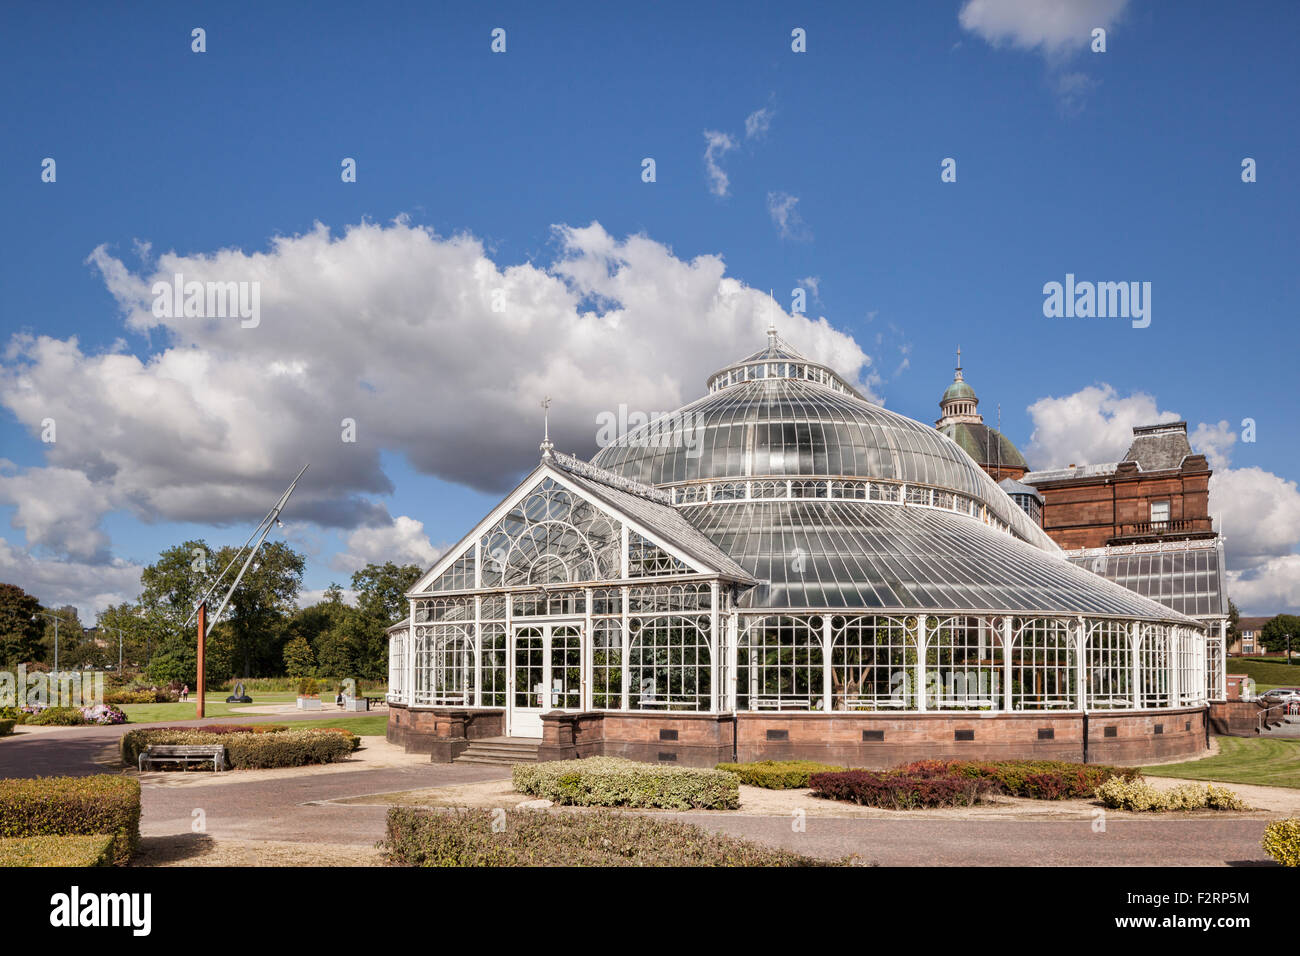 The Winter Gardens and People's Palace museum, Glasgow Green, Scotland. Stock Photo